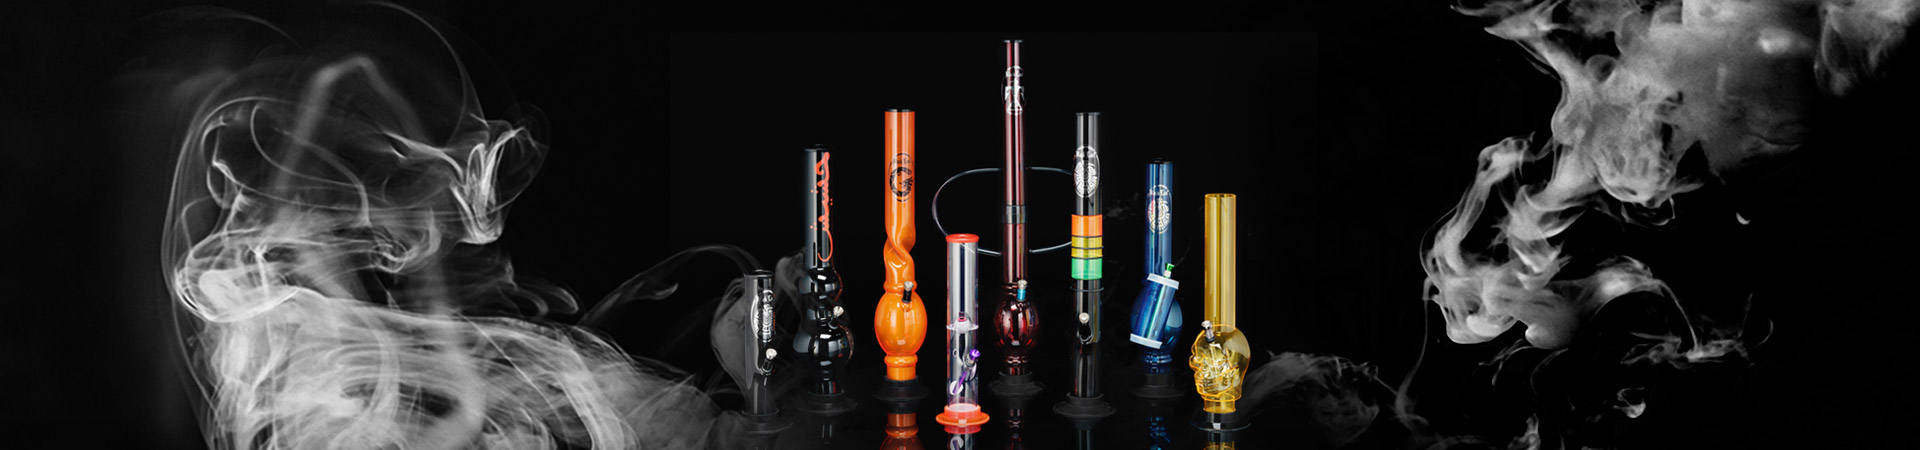 Acrylic bongs – ideal for festivals and on the road